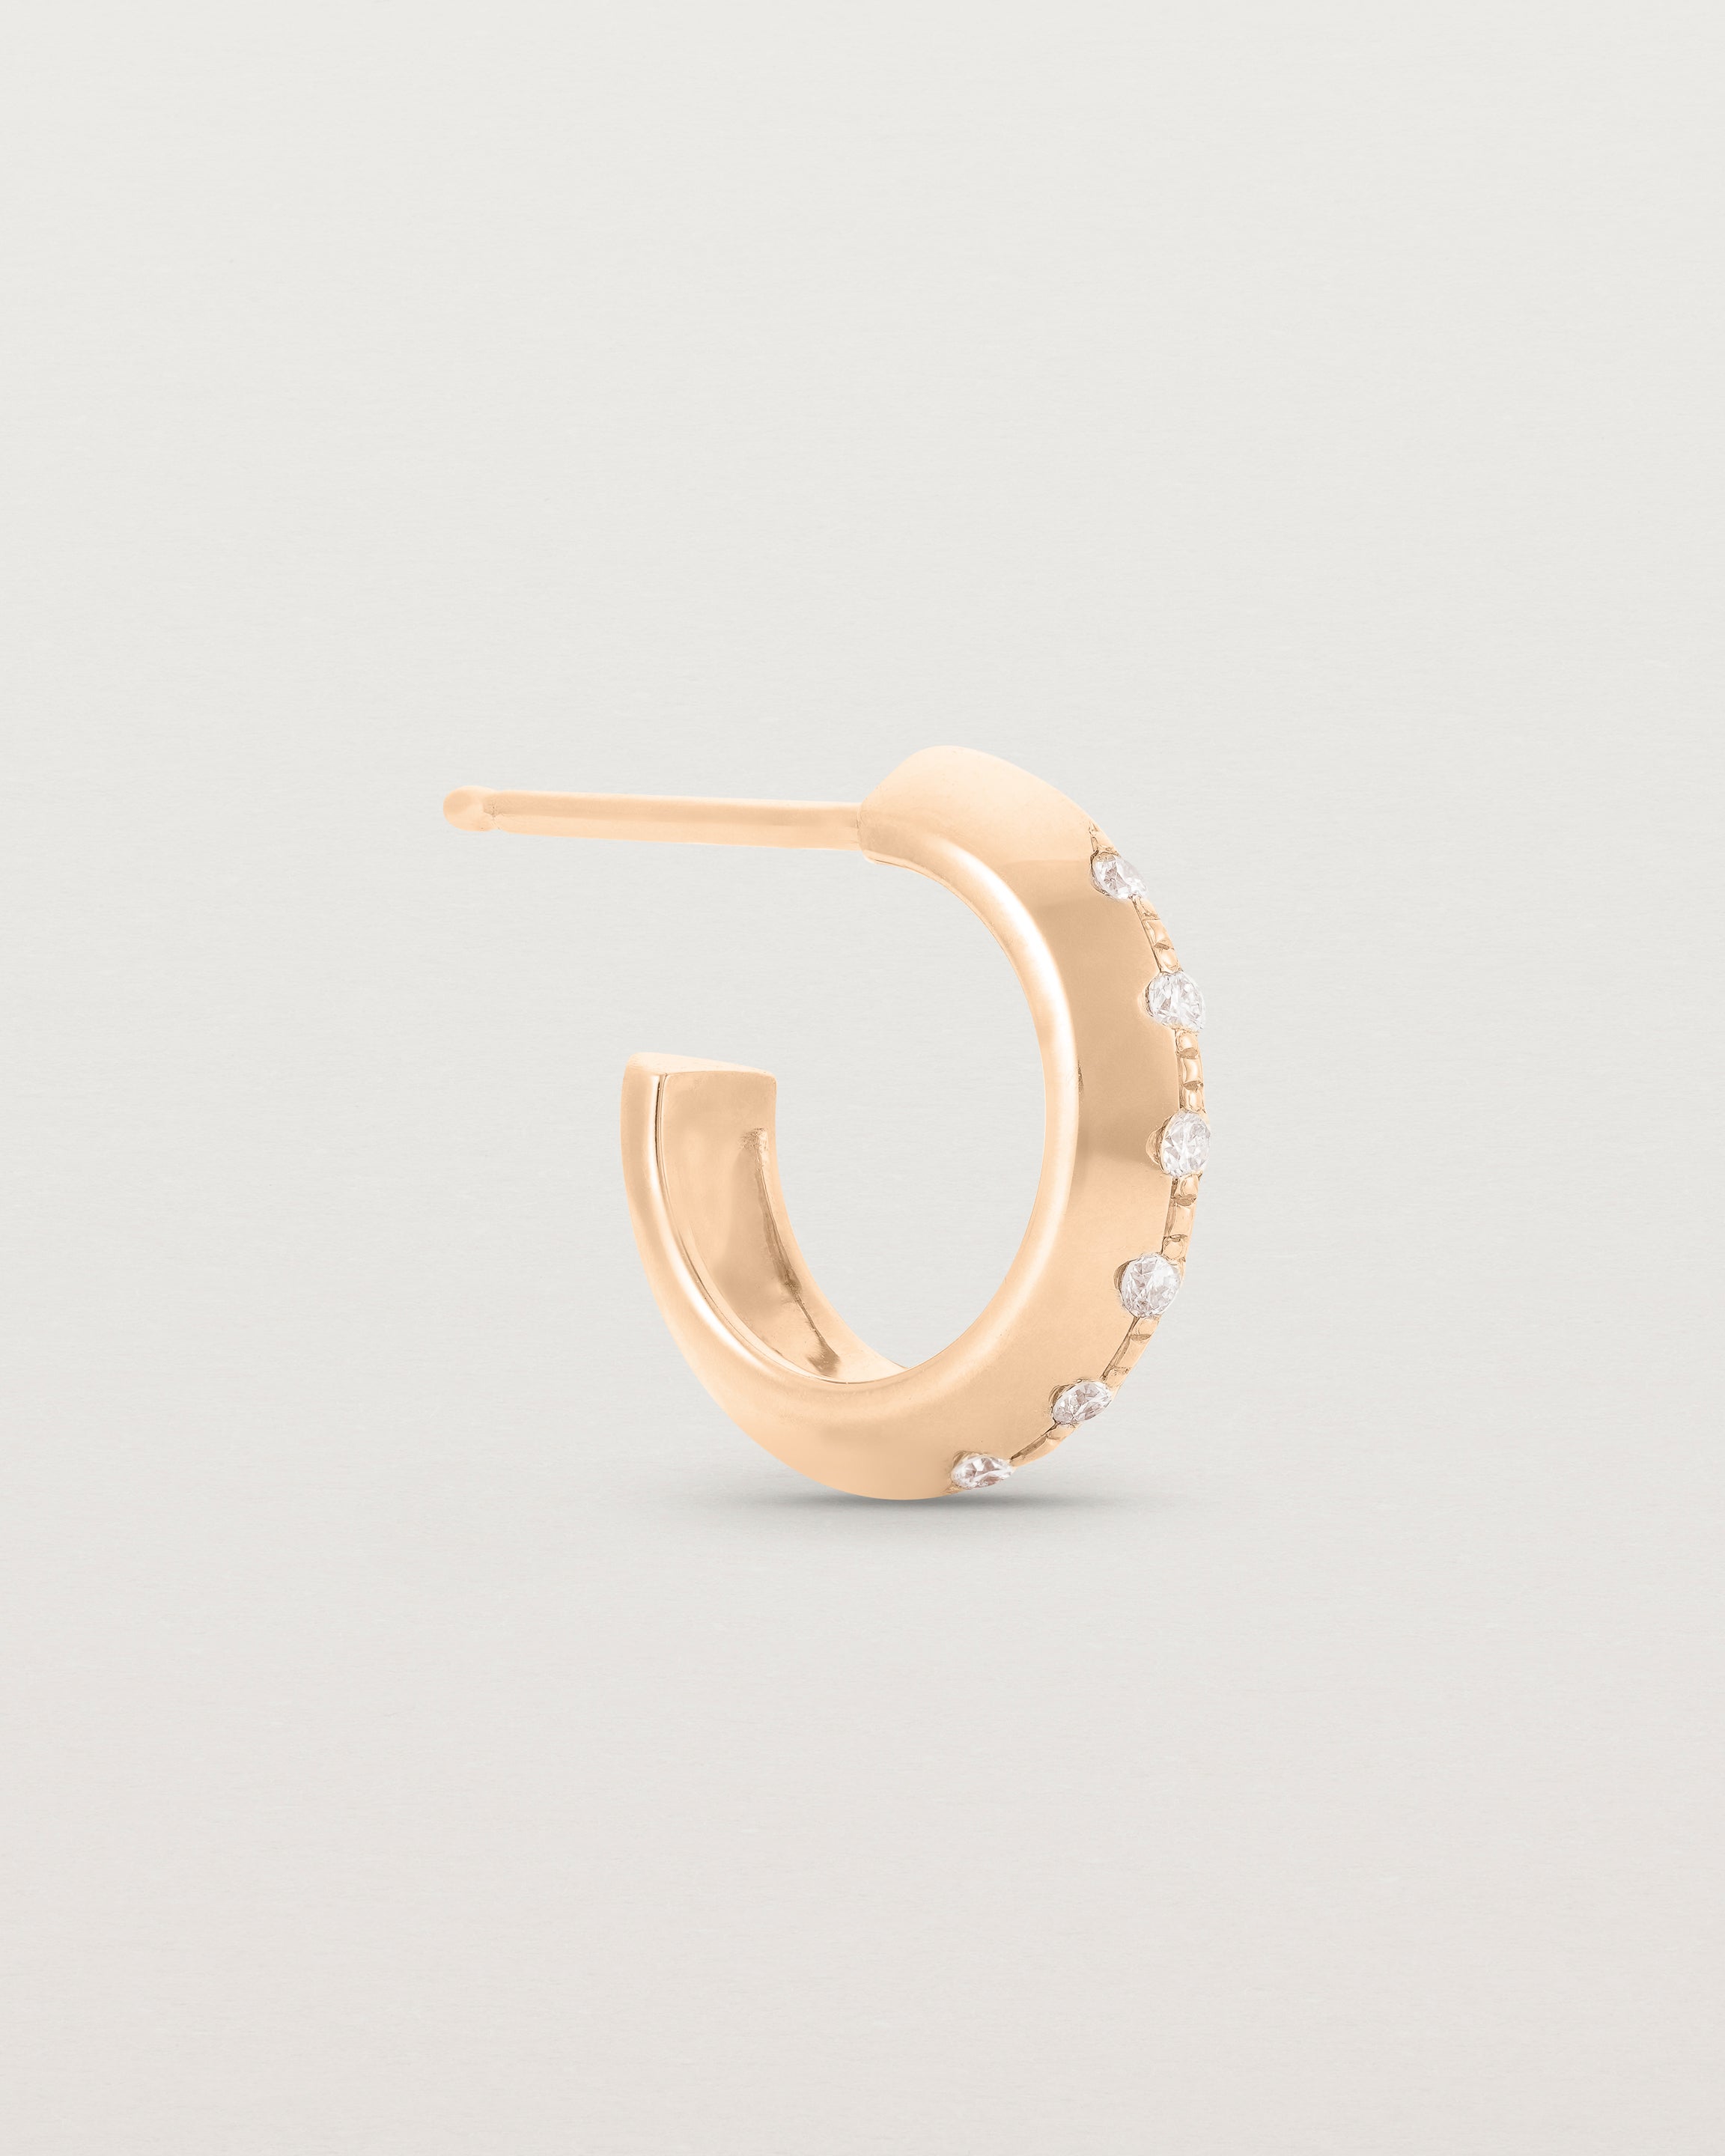 A side view of the Cascade Knife Edge Hoops | Diamonds | Rose Gold.